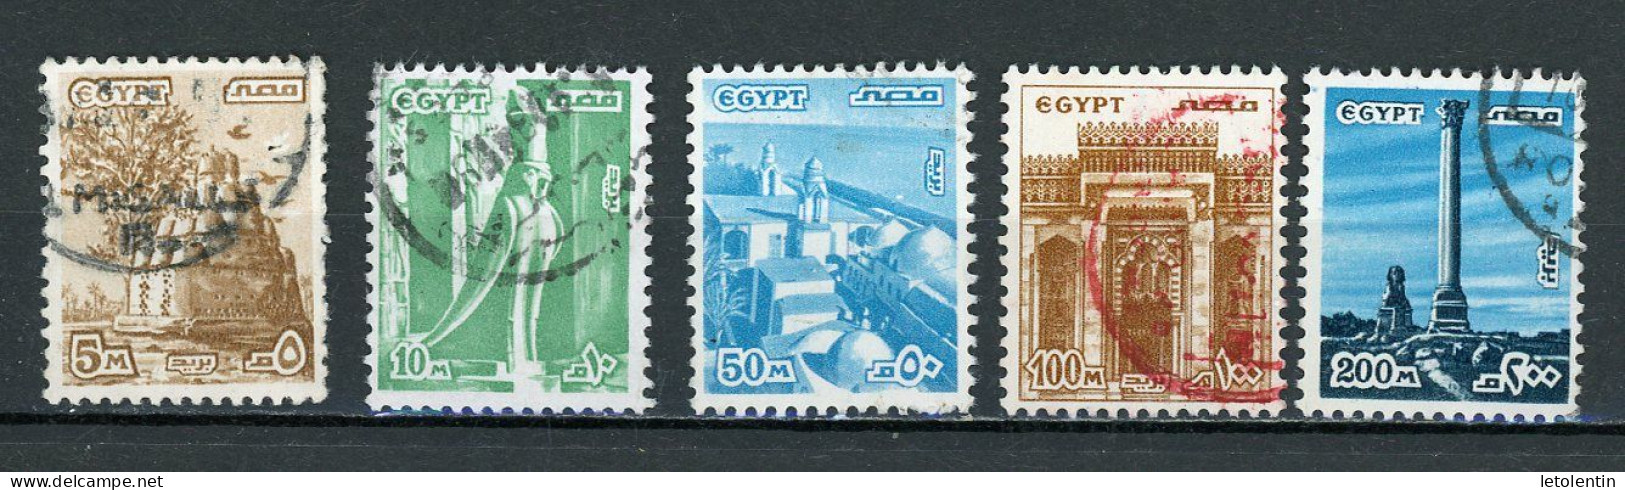 EGYPTE: MONUMENTS - N° Yt 1054+1055+1057+1060+1061 Obli. - Used Stamps